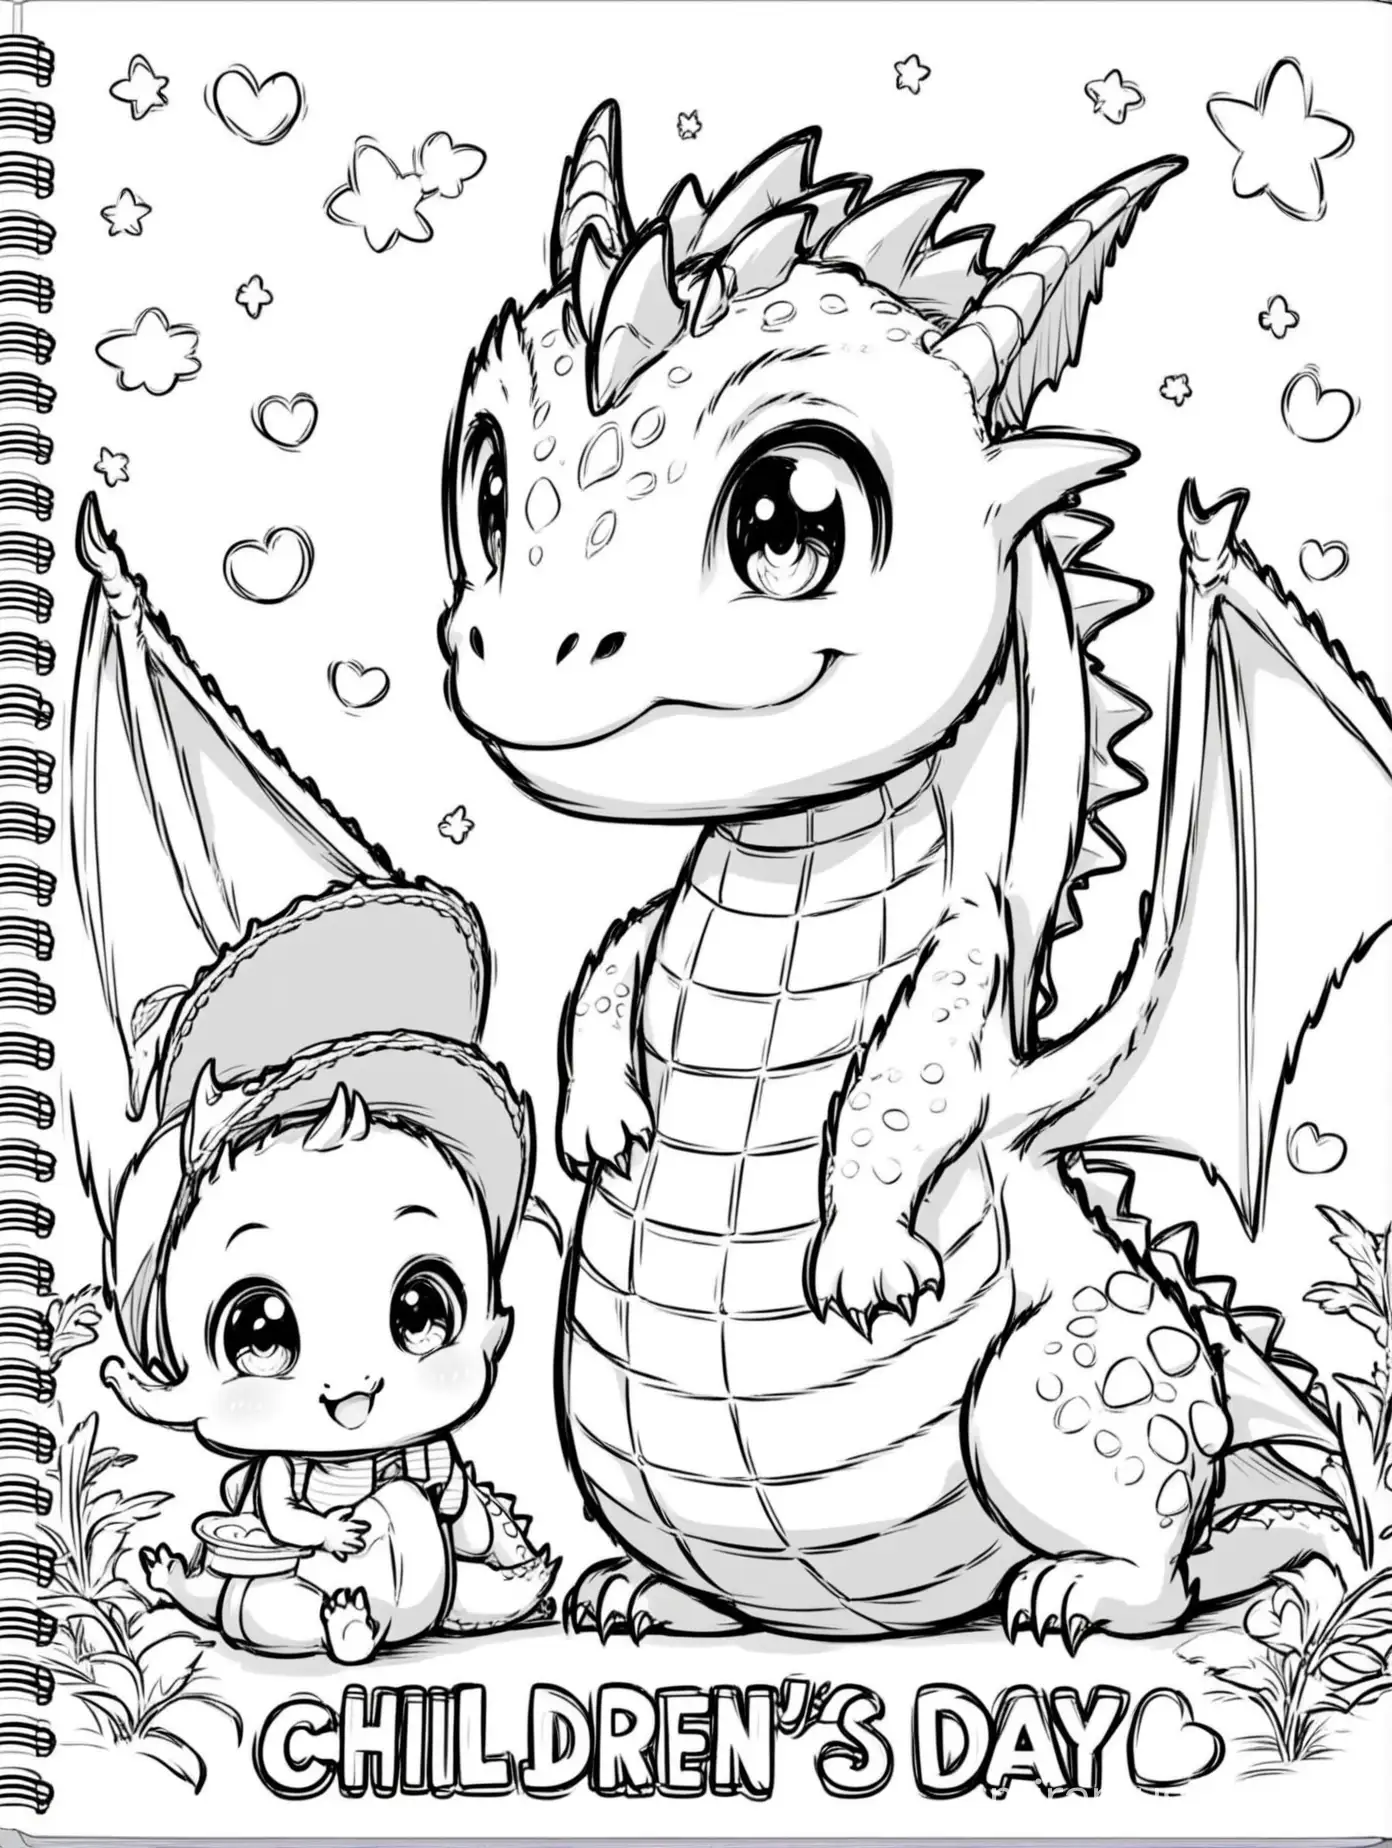 Adorable FatherDragon and Baby Dragon Illustrations for Childrens BW Coloring Book